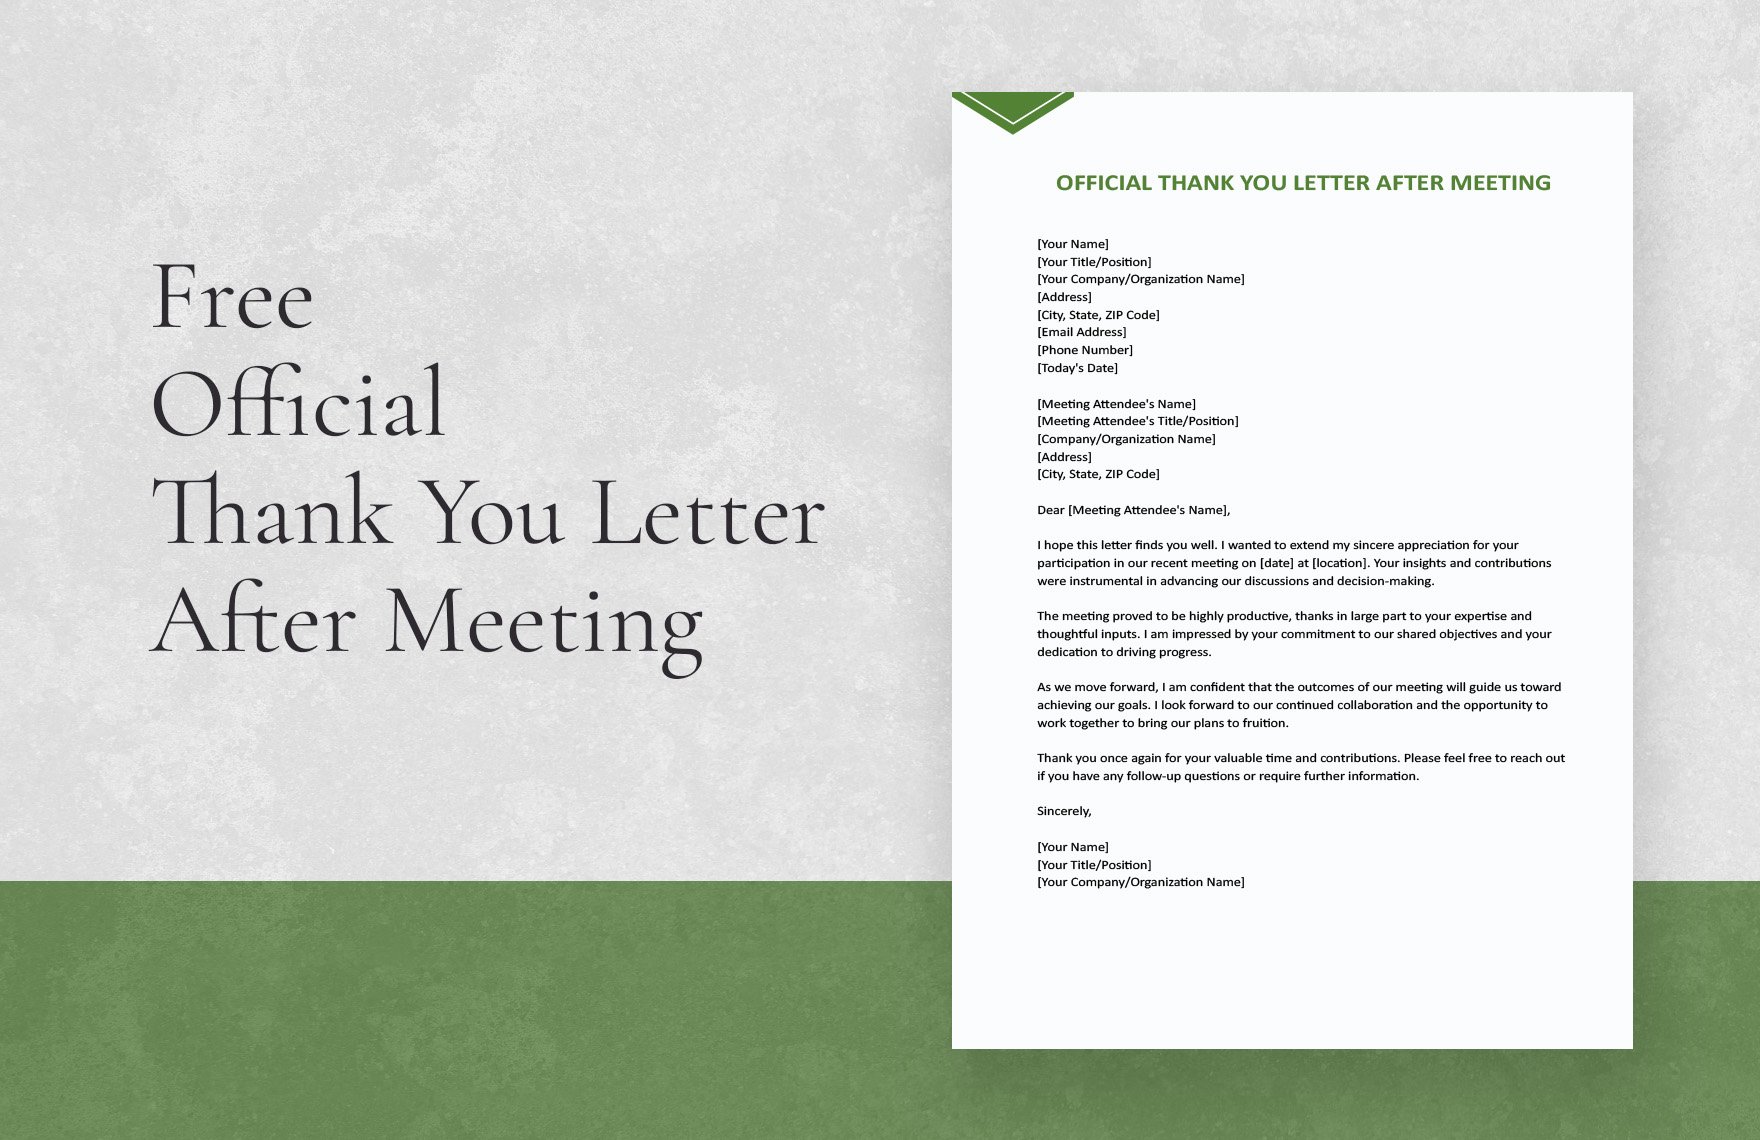 Free Official Thank You Letter After Meeting